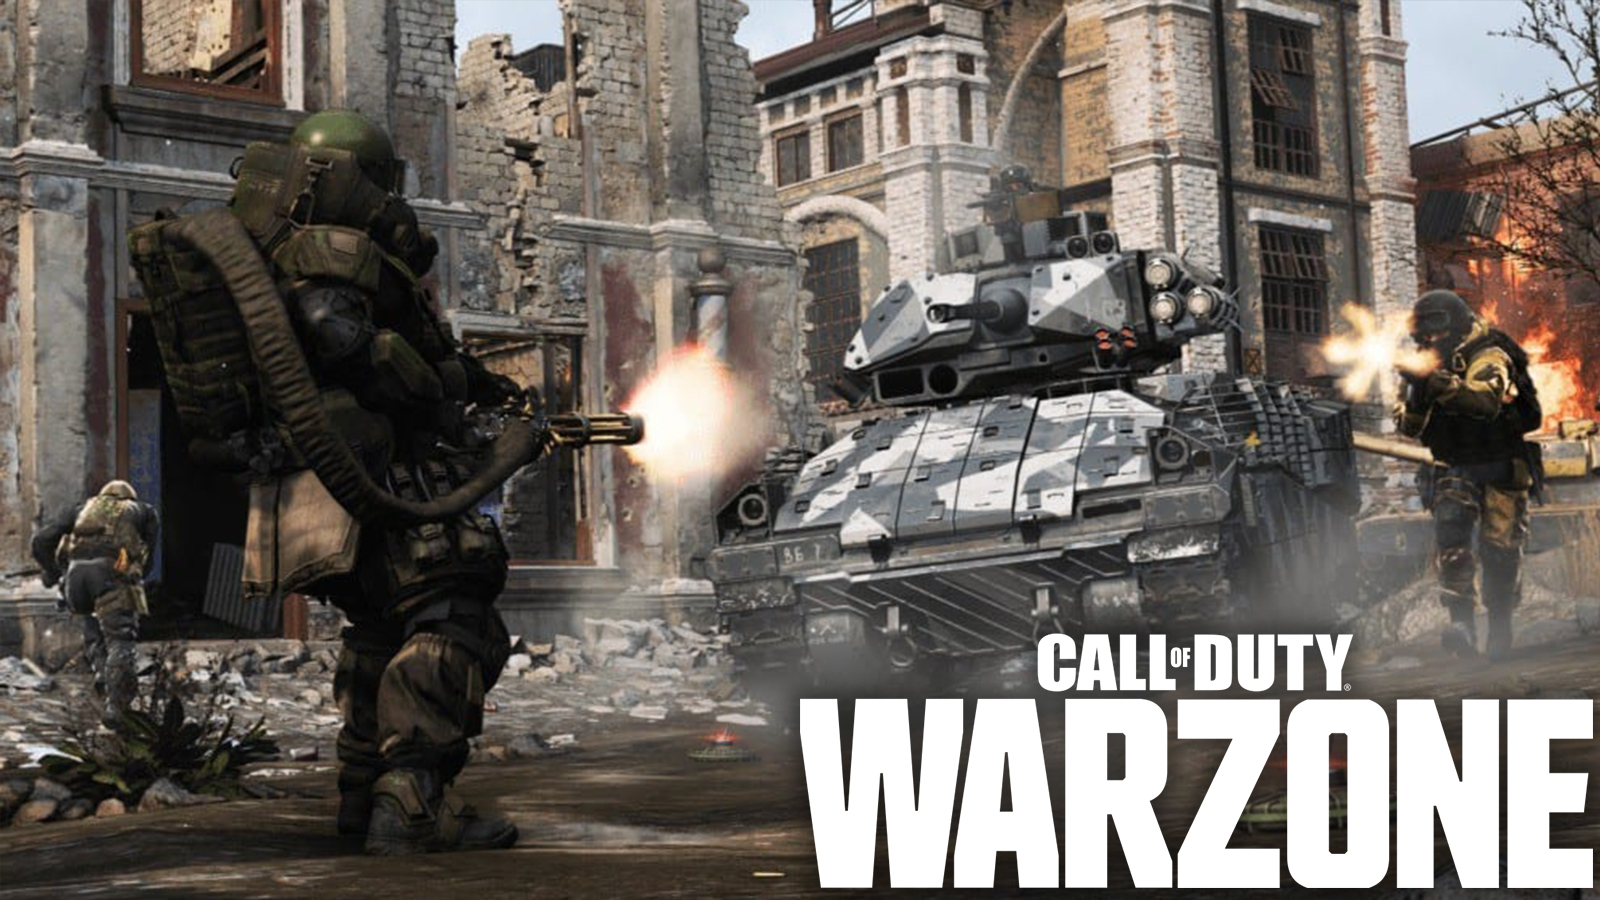 A parents guide to Call of Duty: Warzone